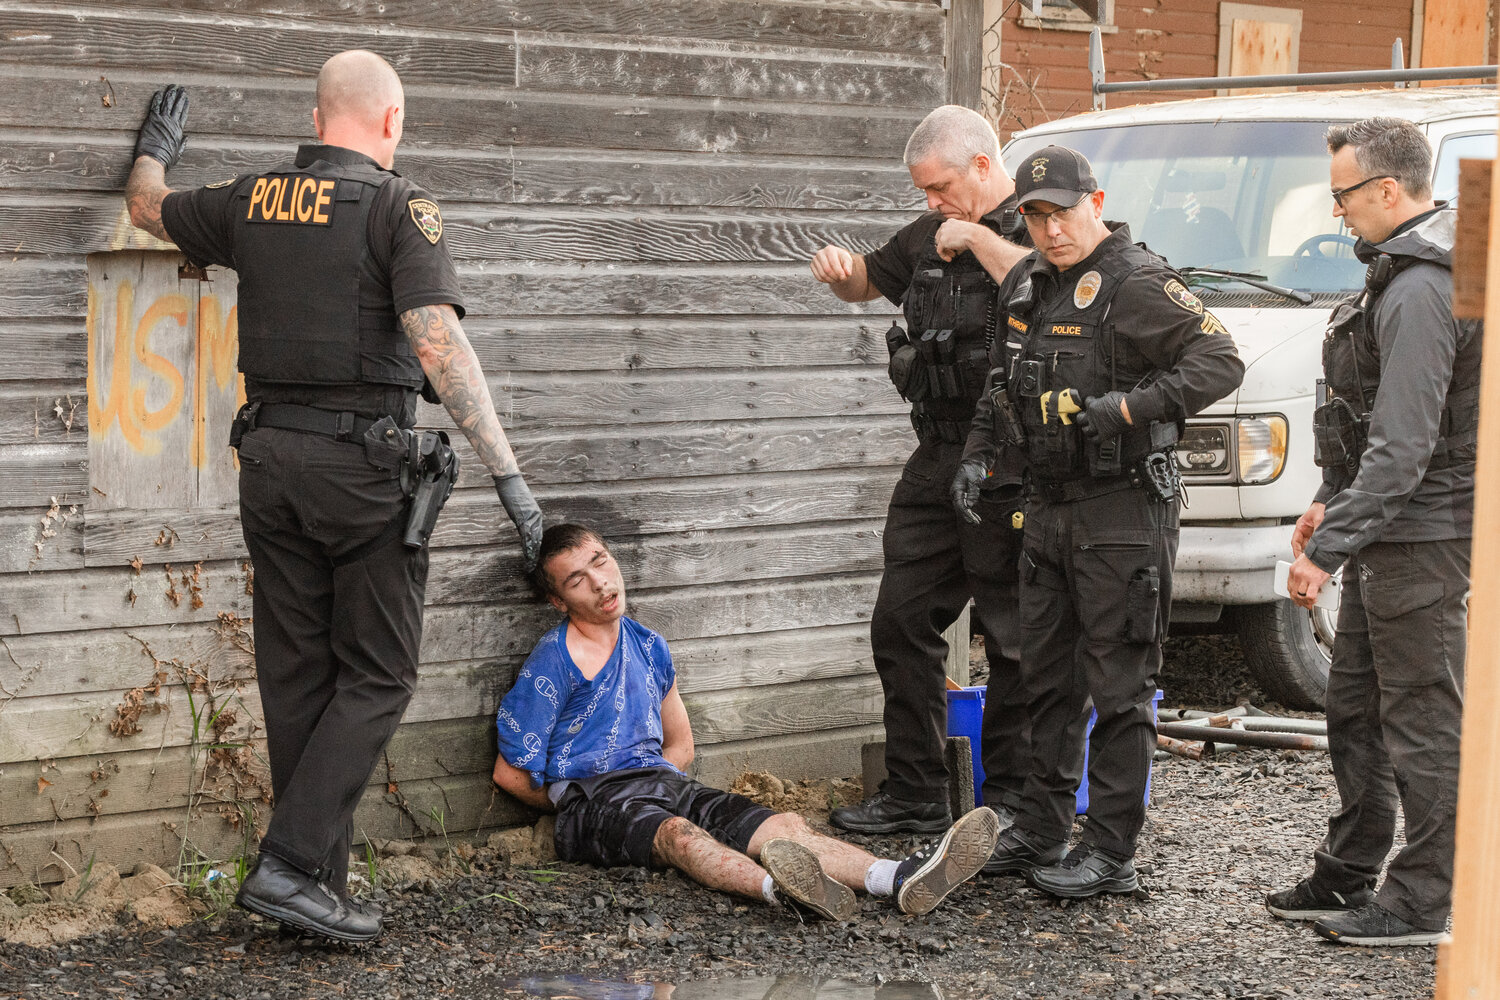 Dayton L. Keyes sits with handcuffs on after leading officers on a foot pursuit in Centralia on Monday, Oct. 16.